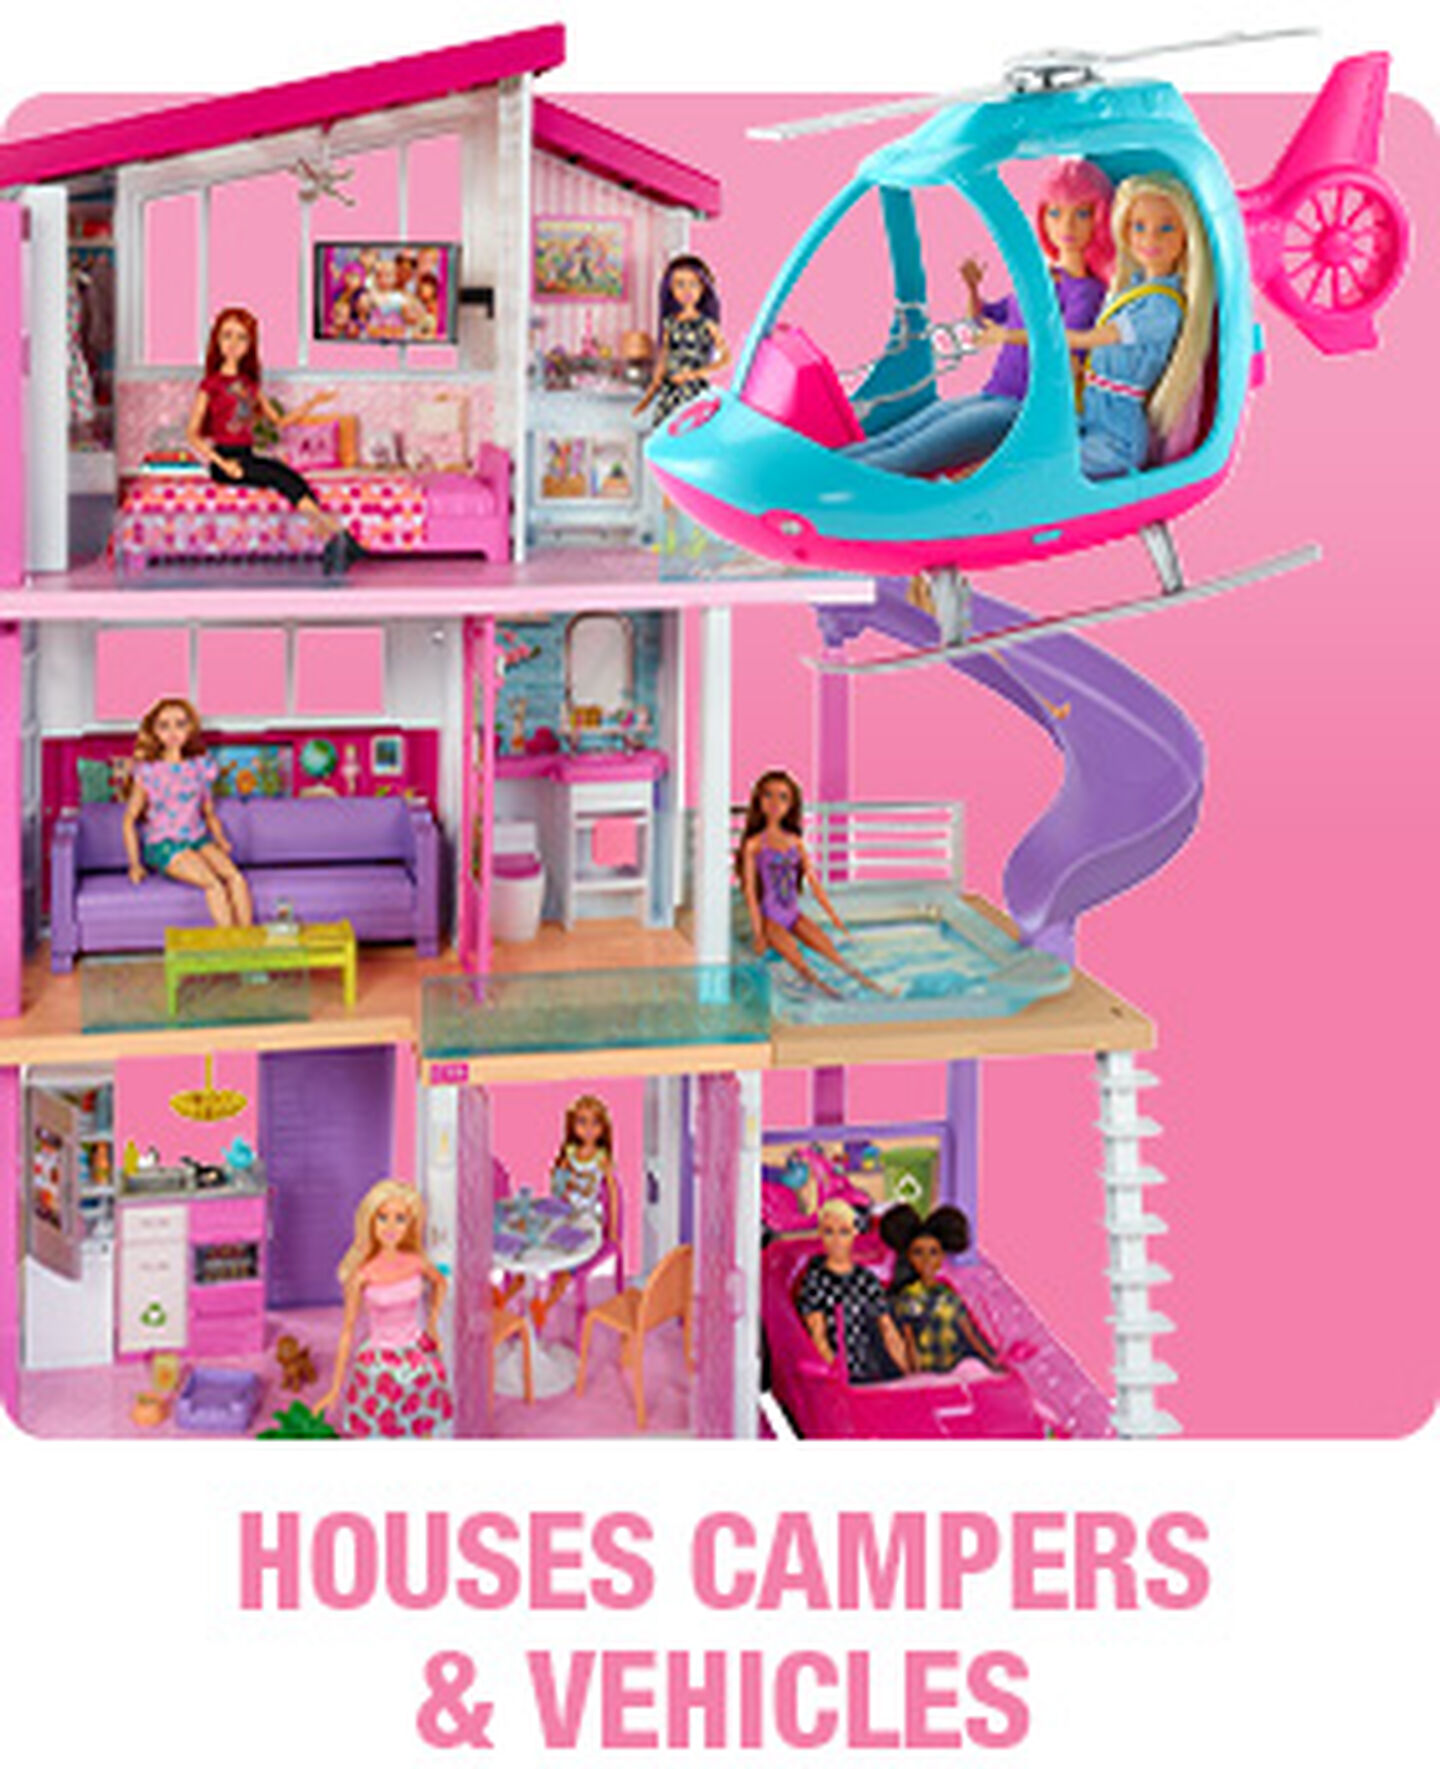 Houses Campers & Vehicles